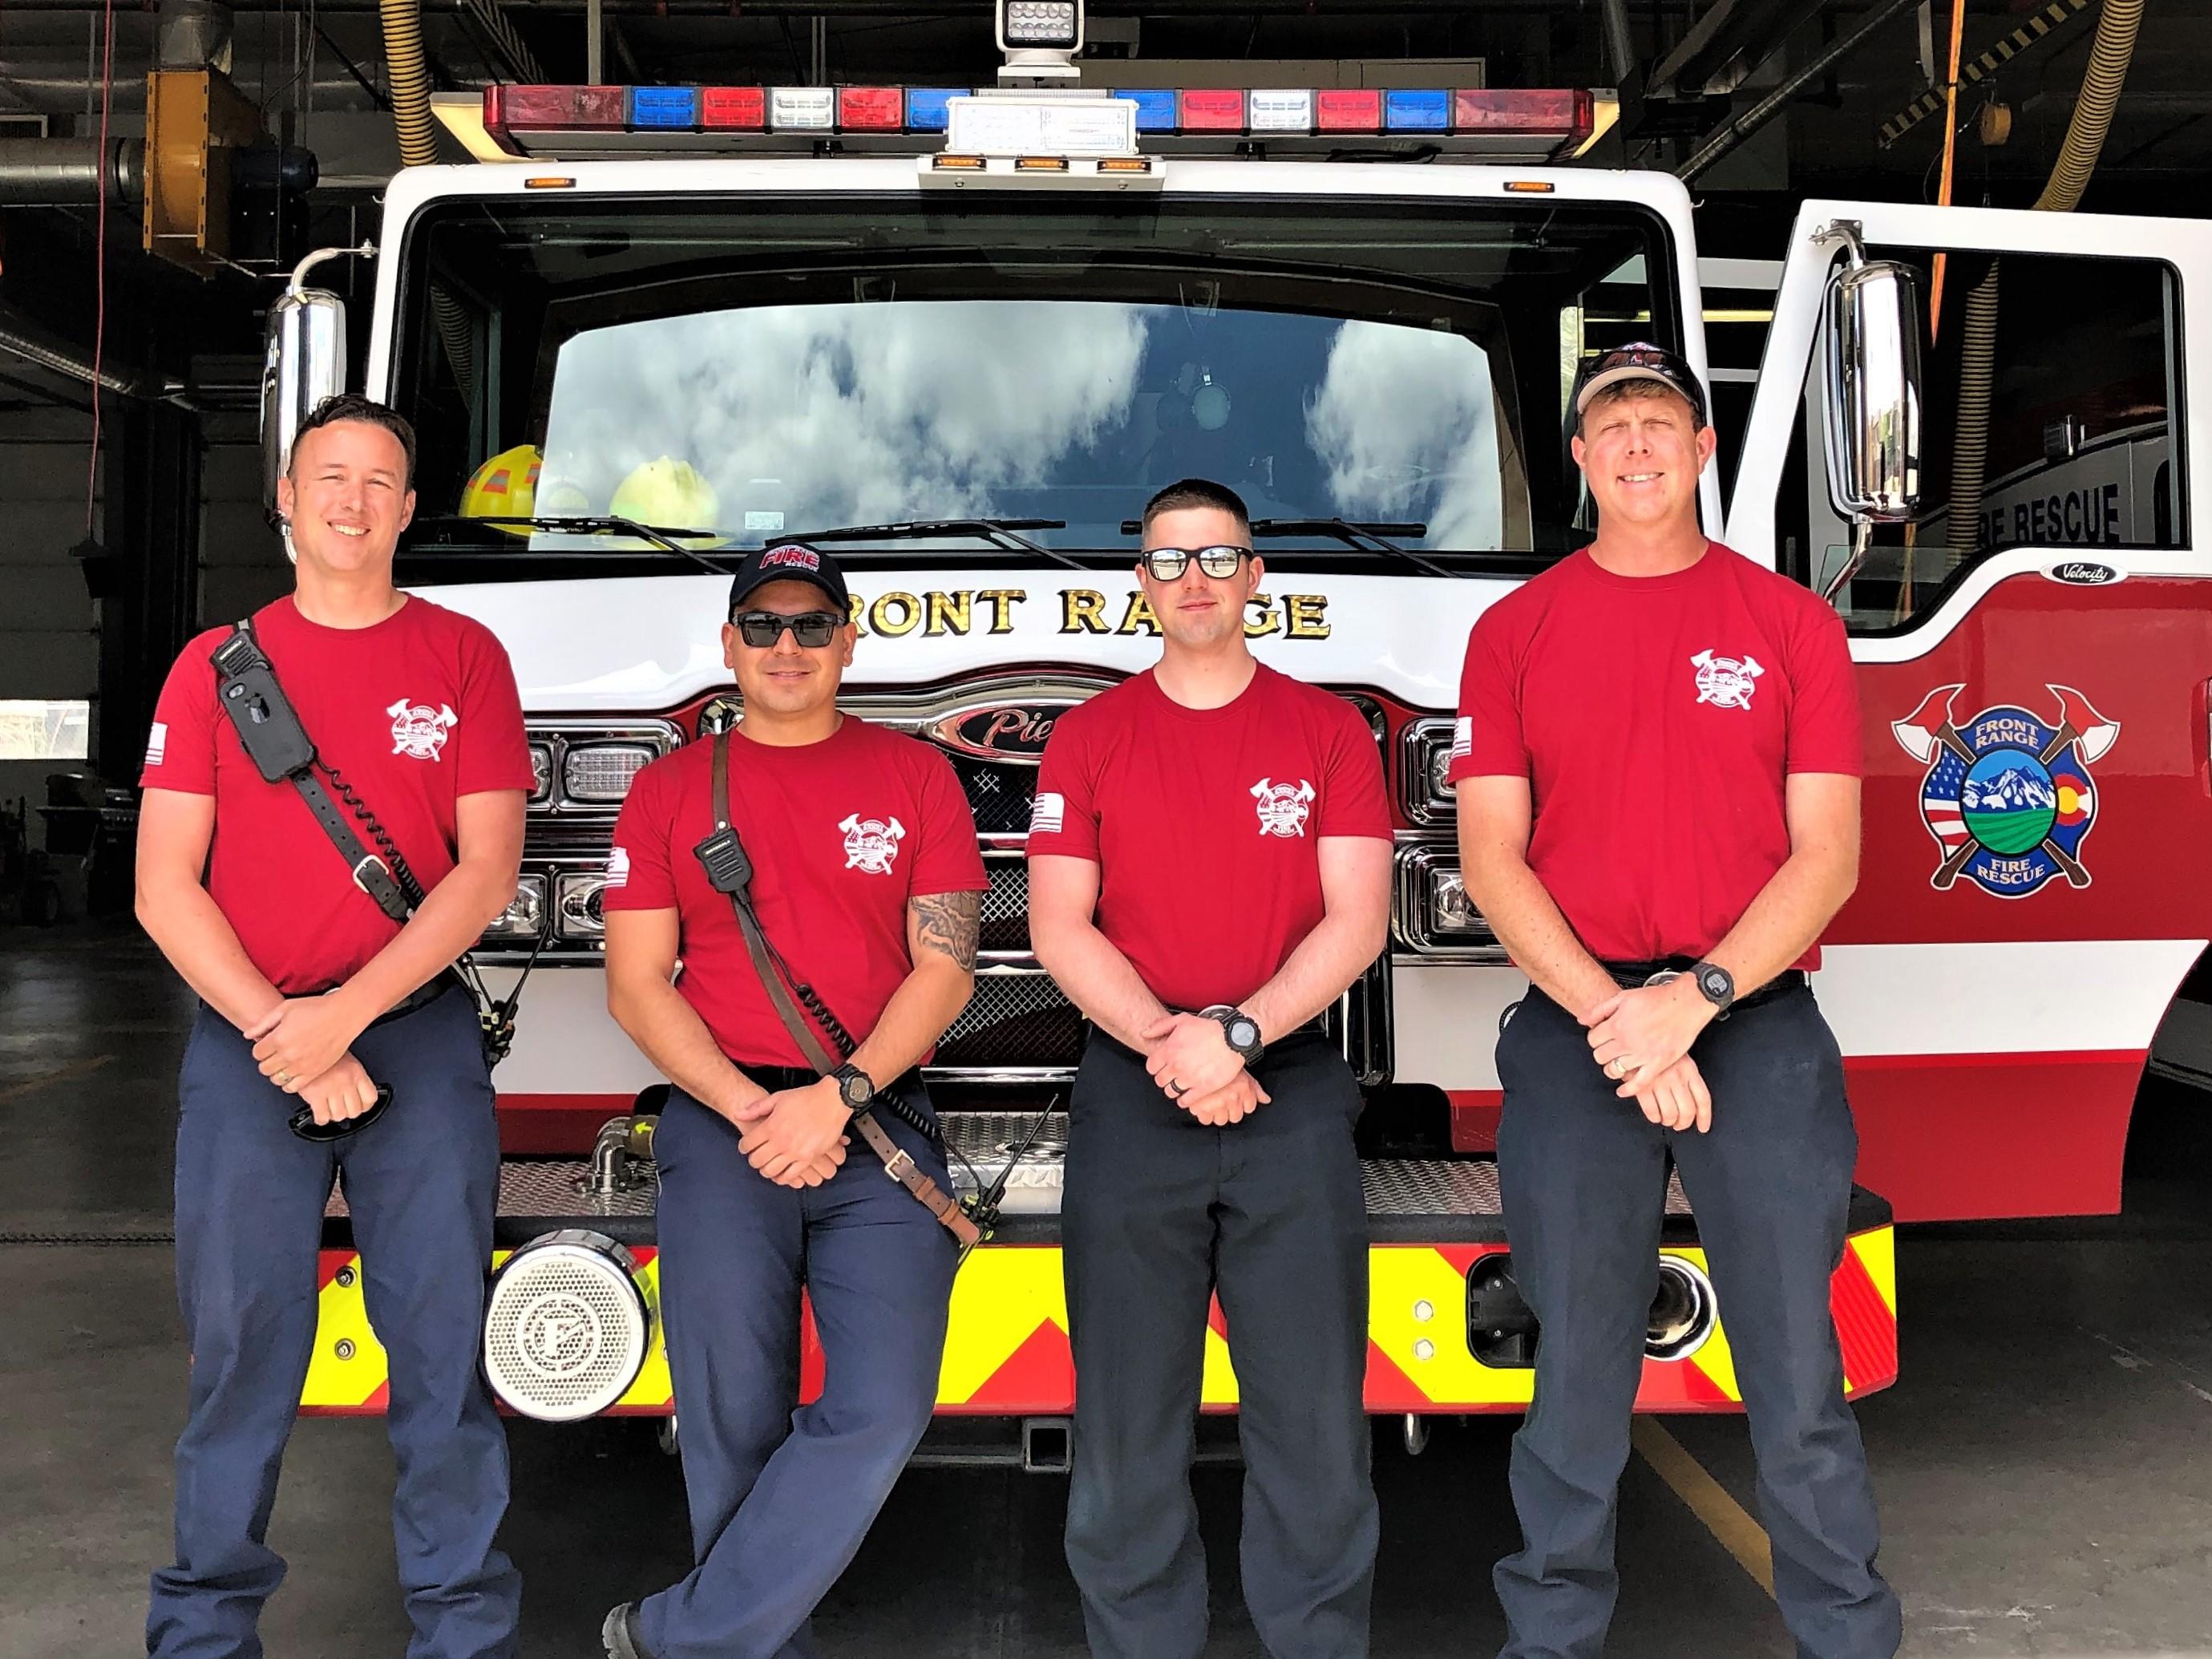 Four Firefighters wearing red and standing in front of a firetruck